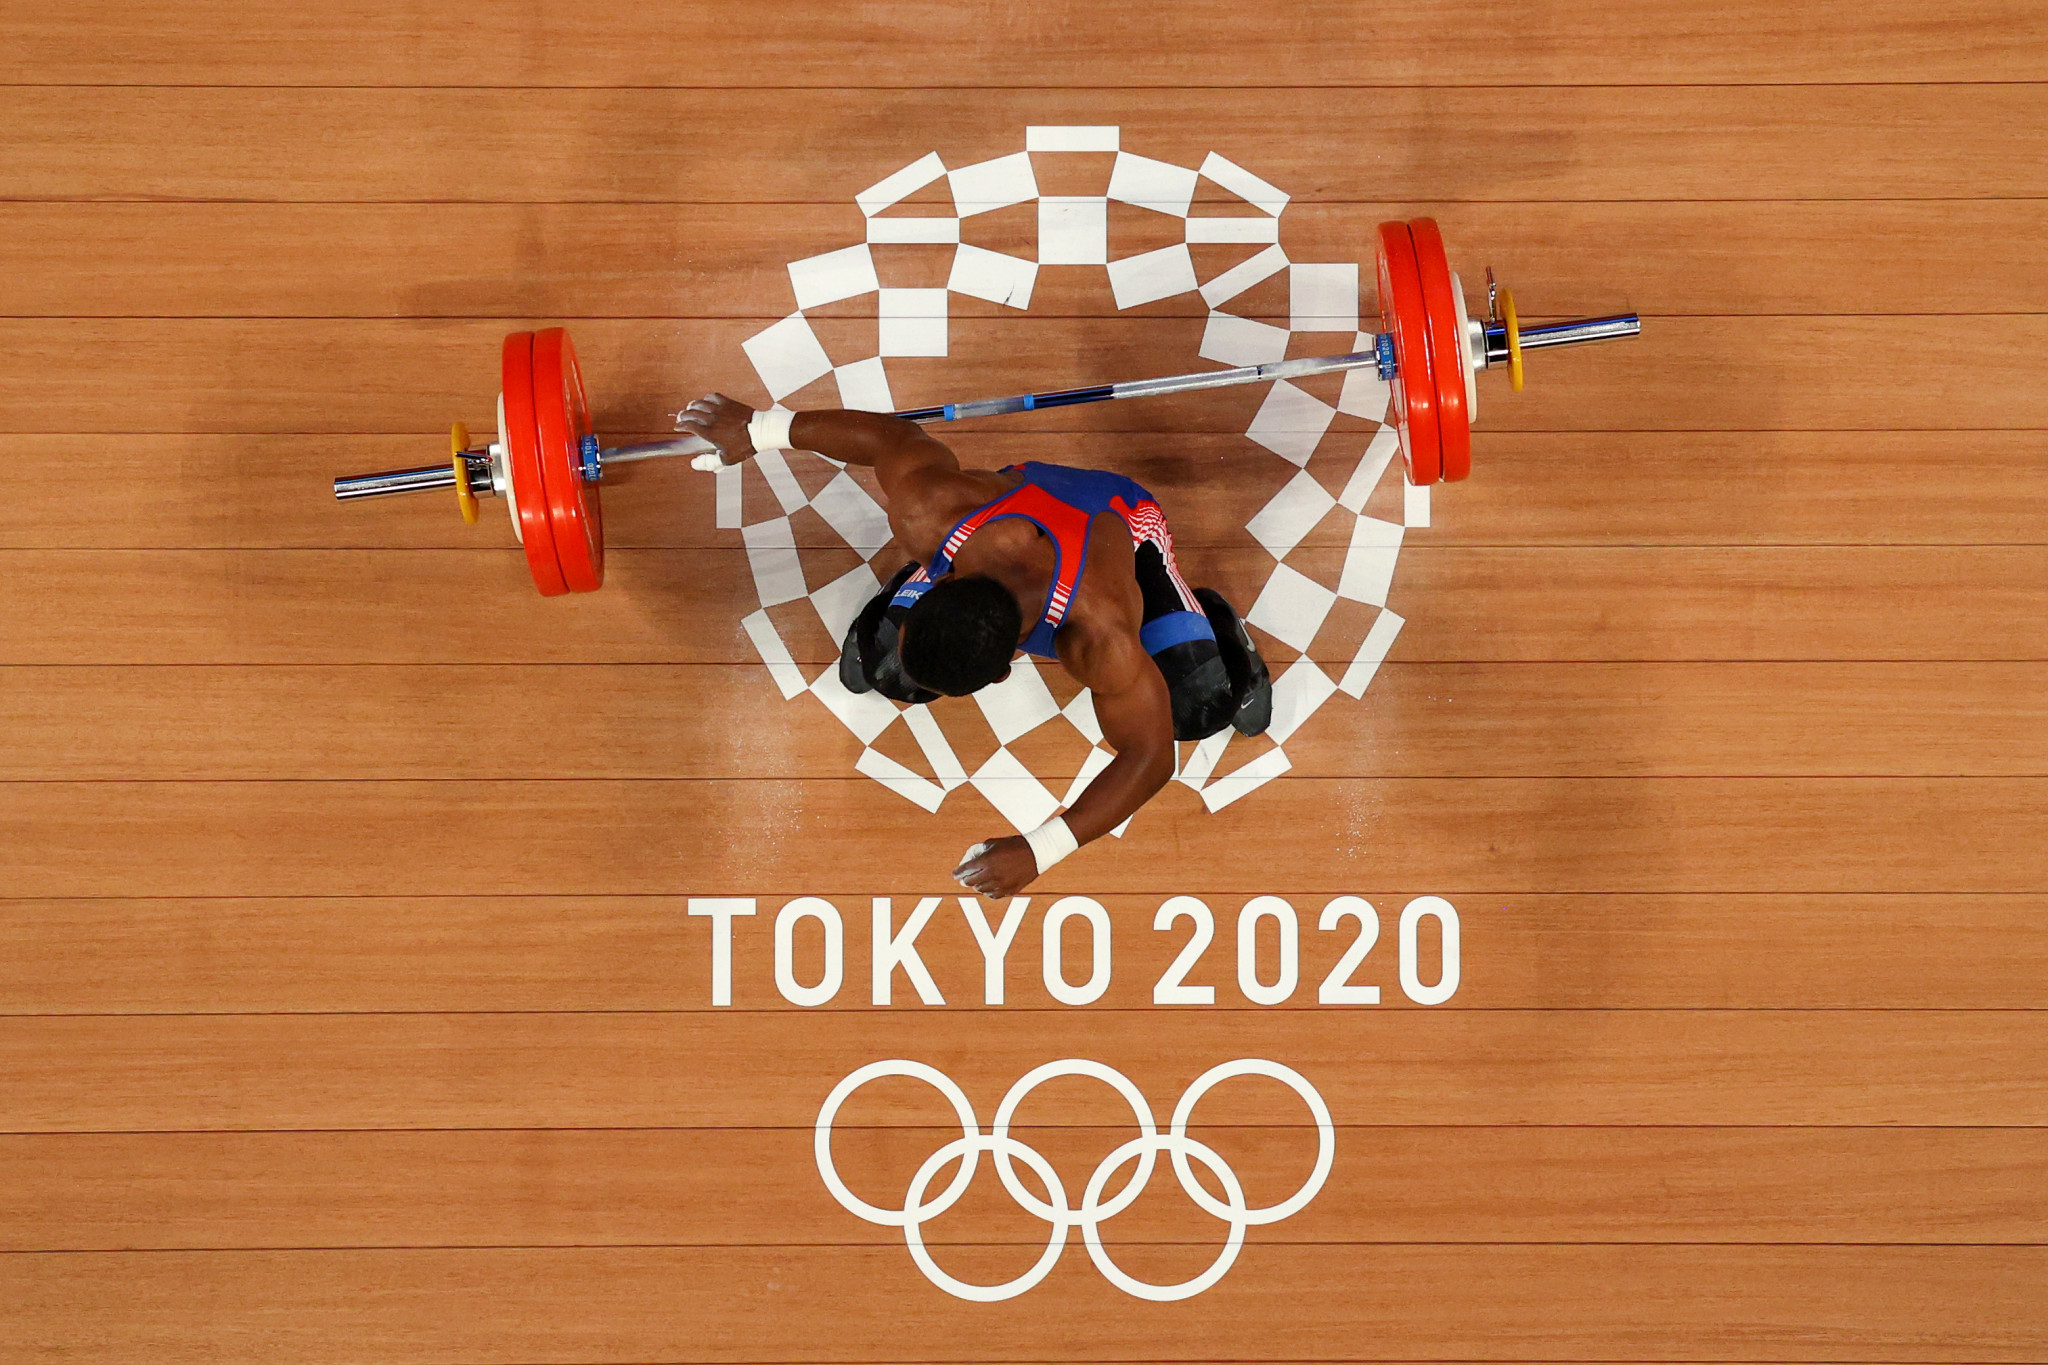 How the experiences of Tokyo 2020 may impact Pars 2024 was discussed by the ORIS Weightlifting Working Group ©Getty Images